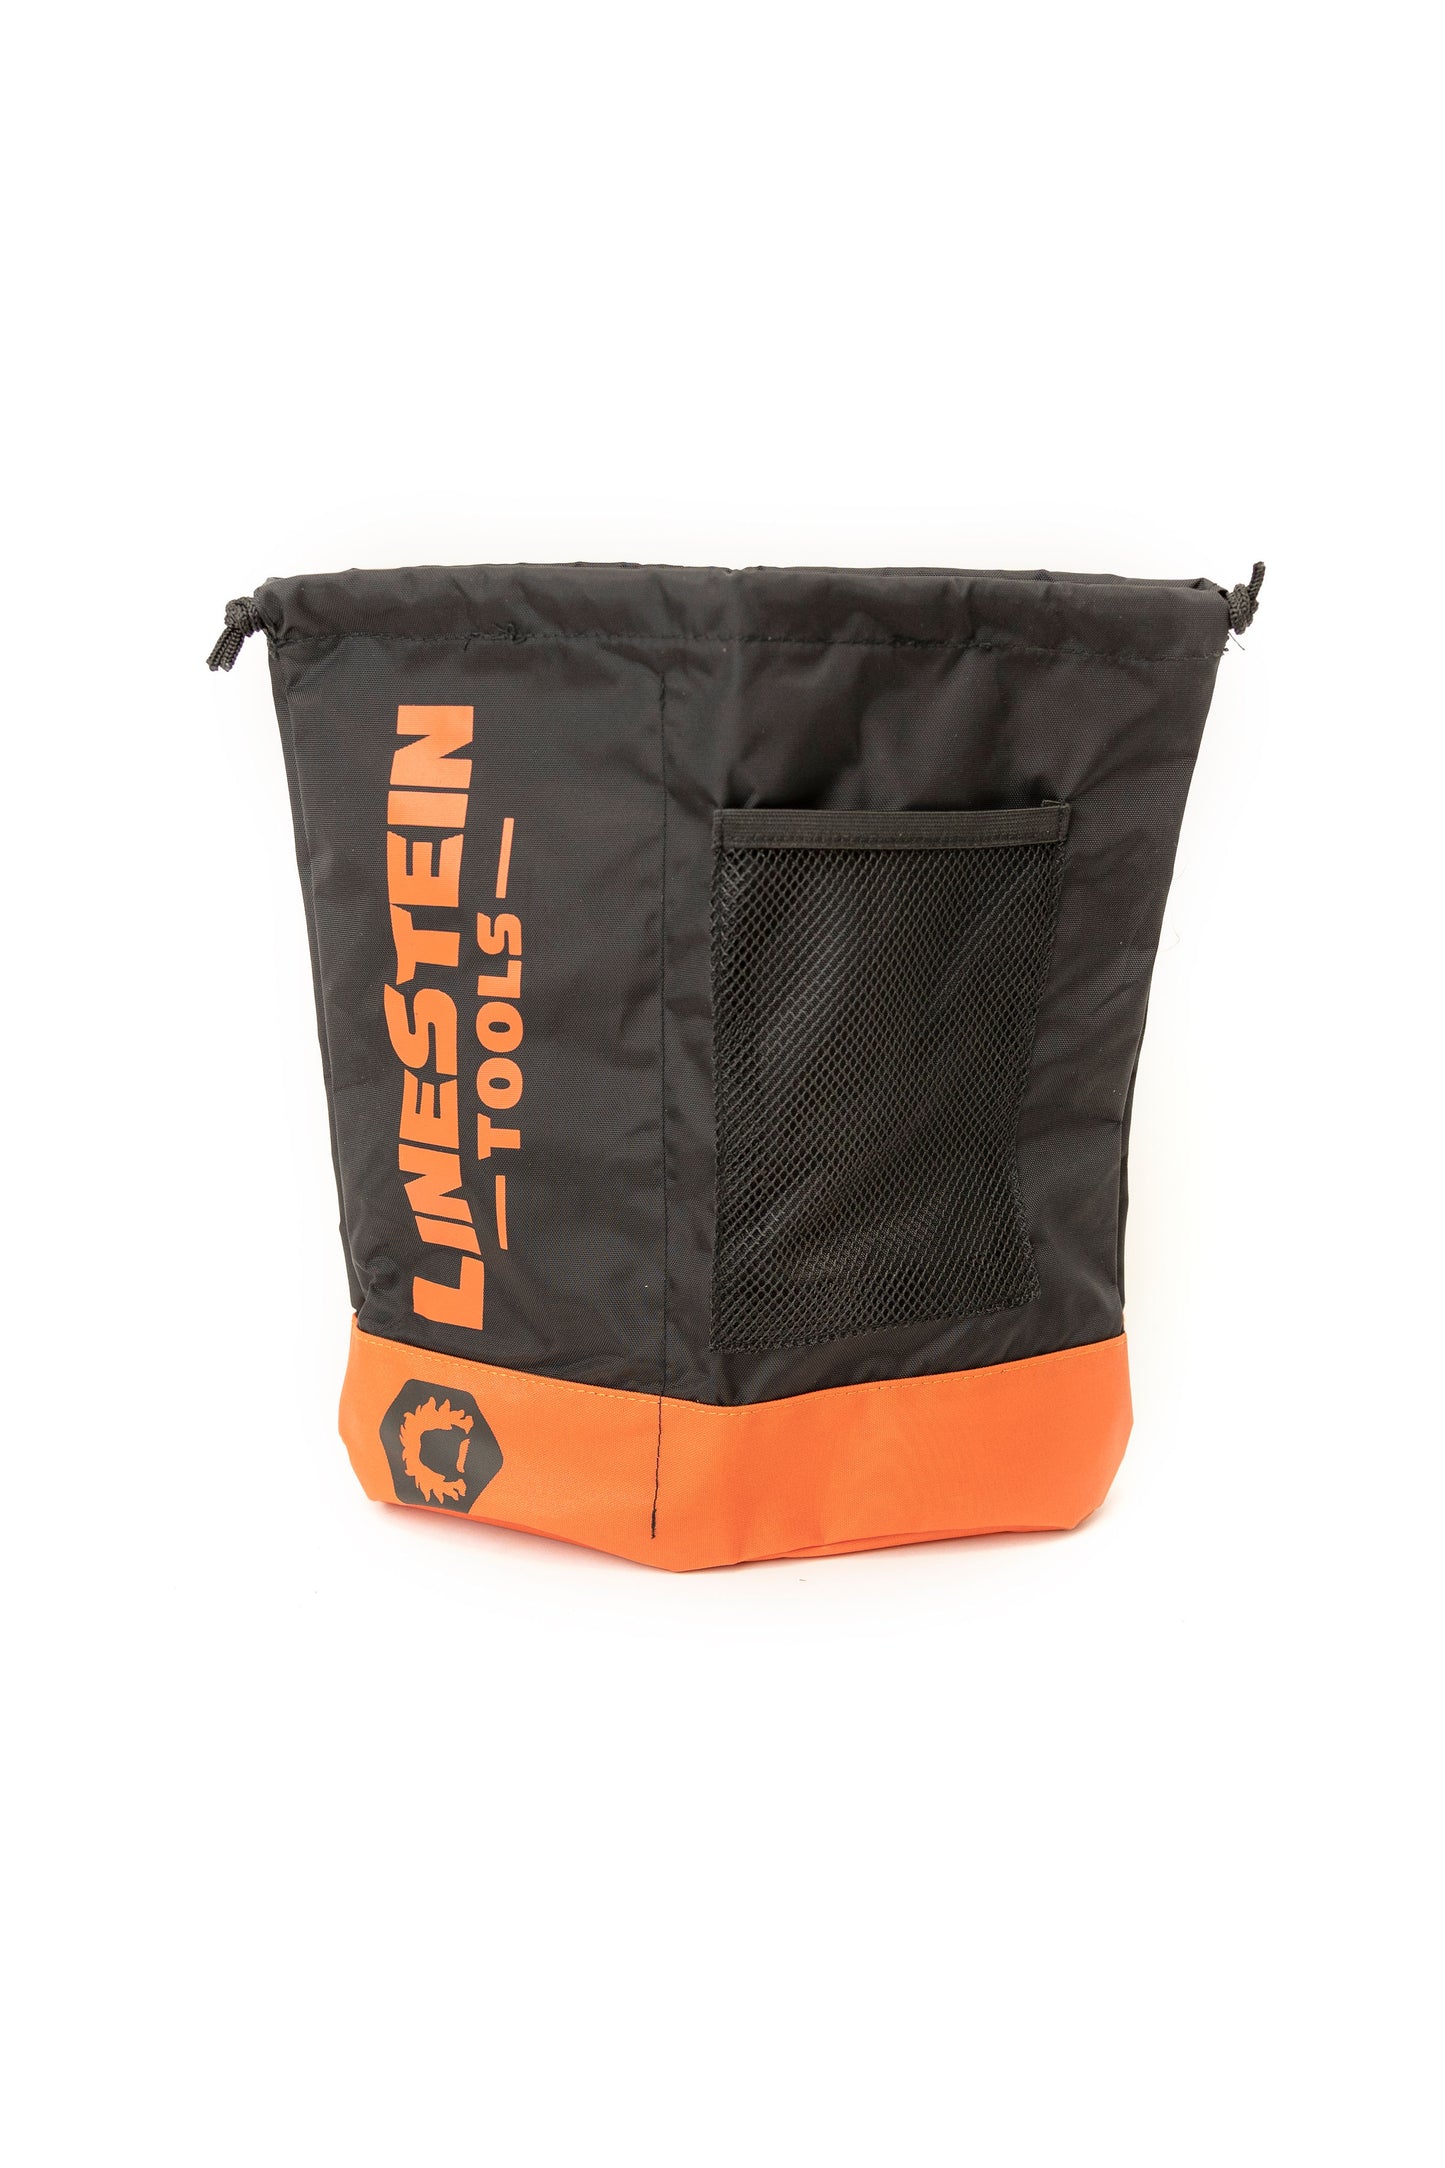 LineStein Alignment Tool Bag